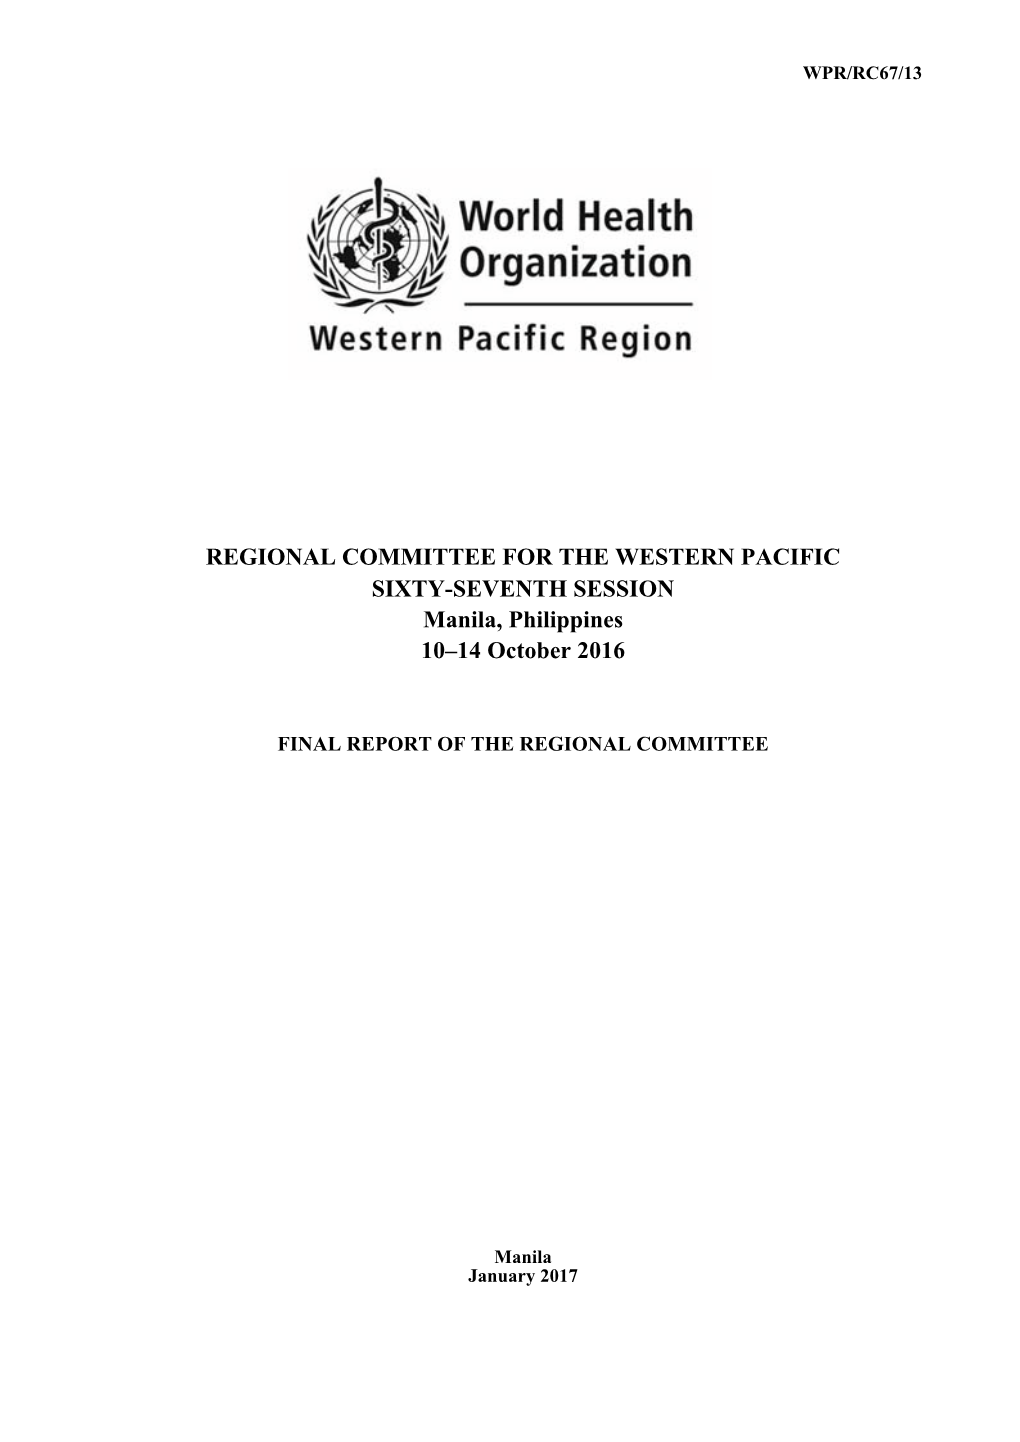 REGIONAL COMMITTEE for the WESTERN PACIFIC SIXTY-SEVENTH SESSION Manila, Philippines 10–14 October 2016